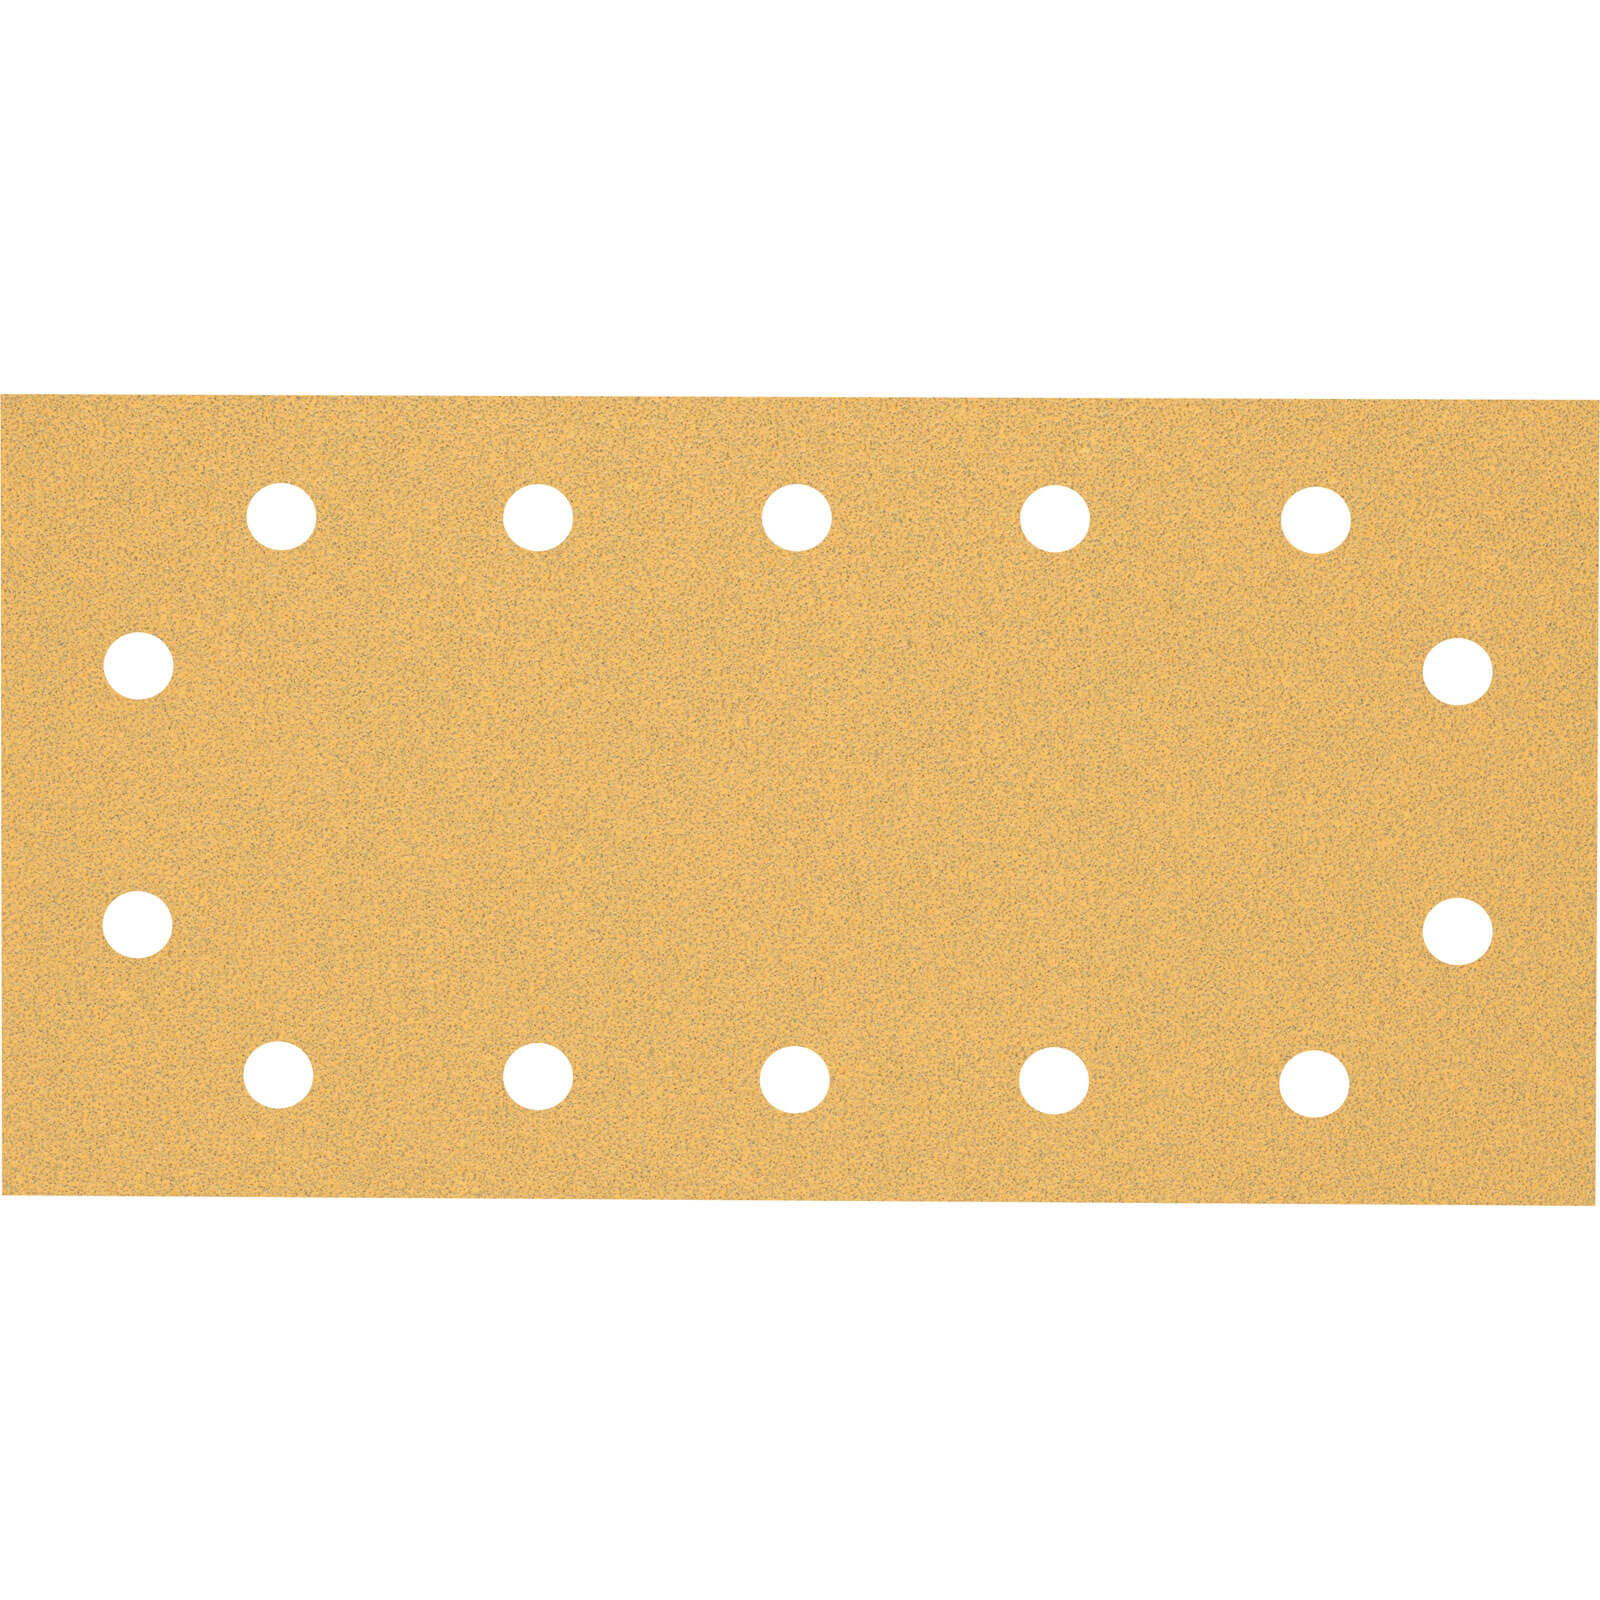 Image of Bosch Expert C470 Punched Hook and Loop 1/2 Sanding Sheets 115mm x 230mm 80g Pack of 10